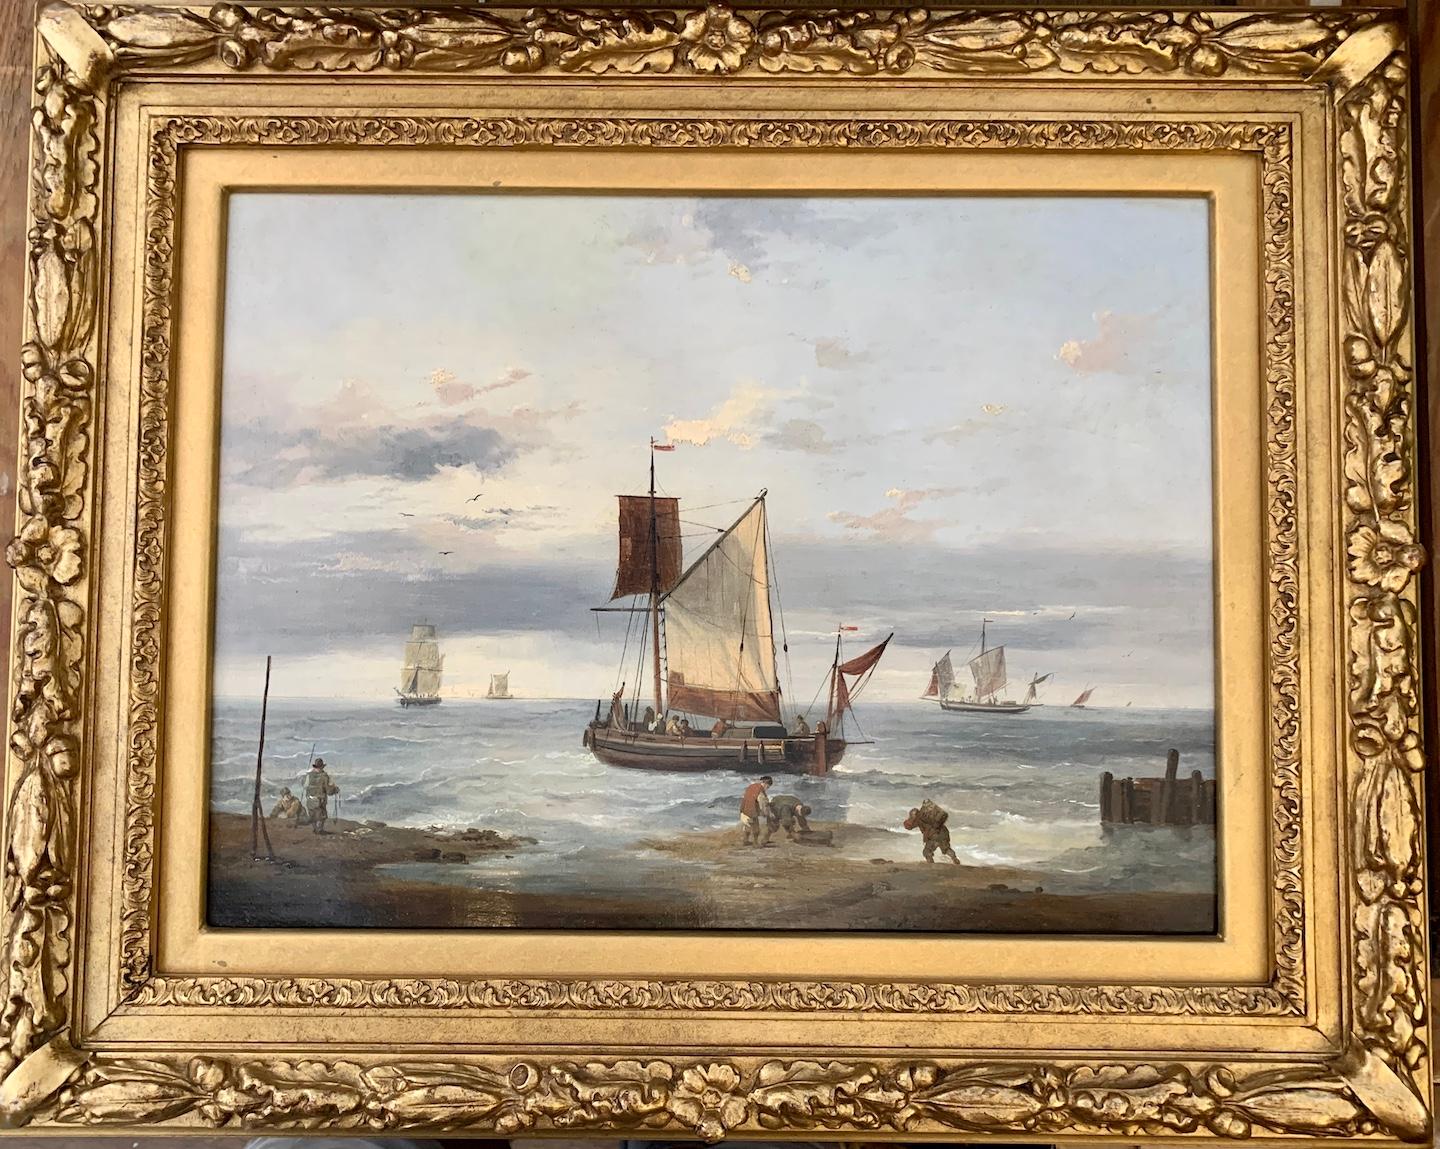 19th century English marine of fishing boats at sea with figures in a landscape. - Painting by Charles Martin Powell